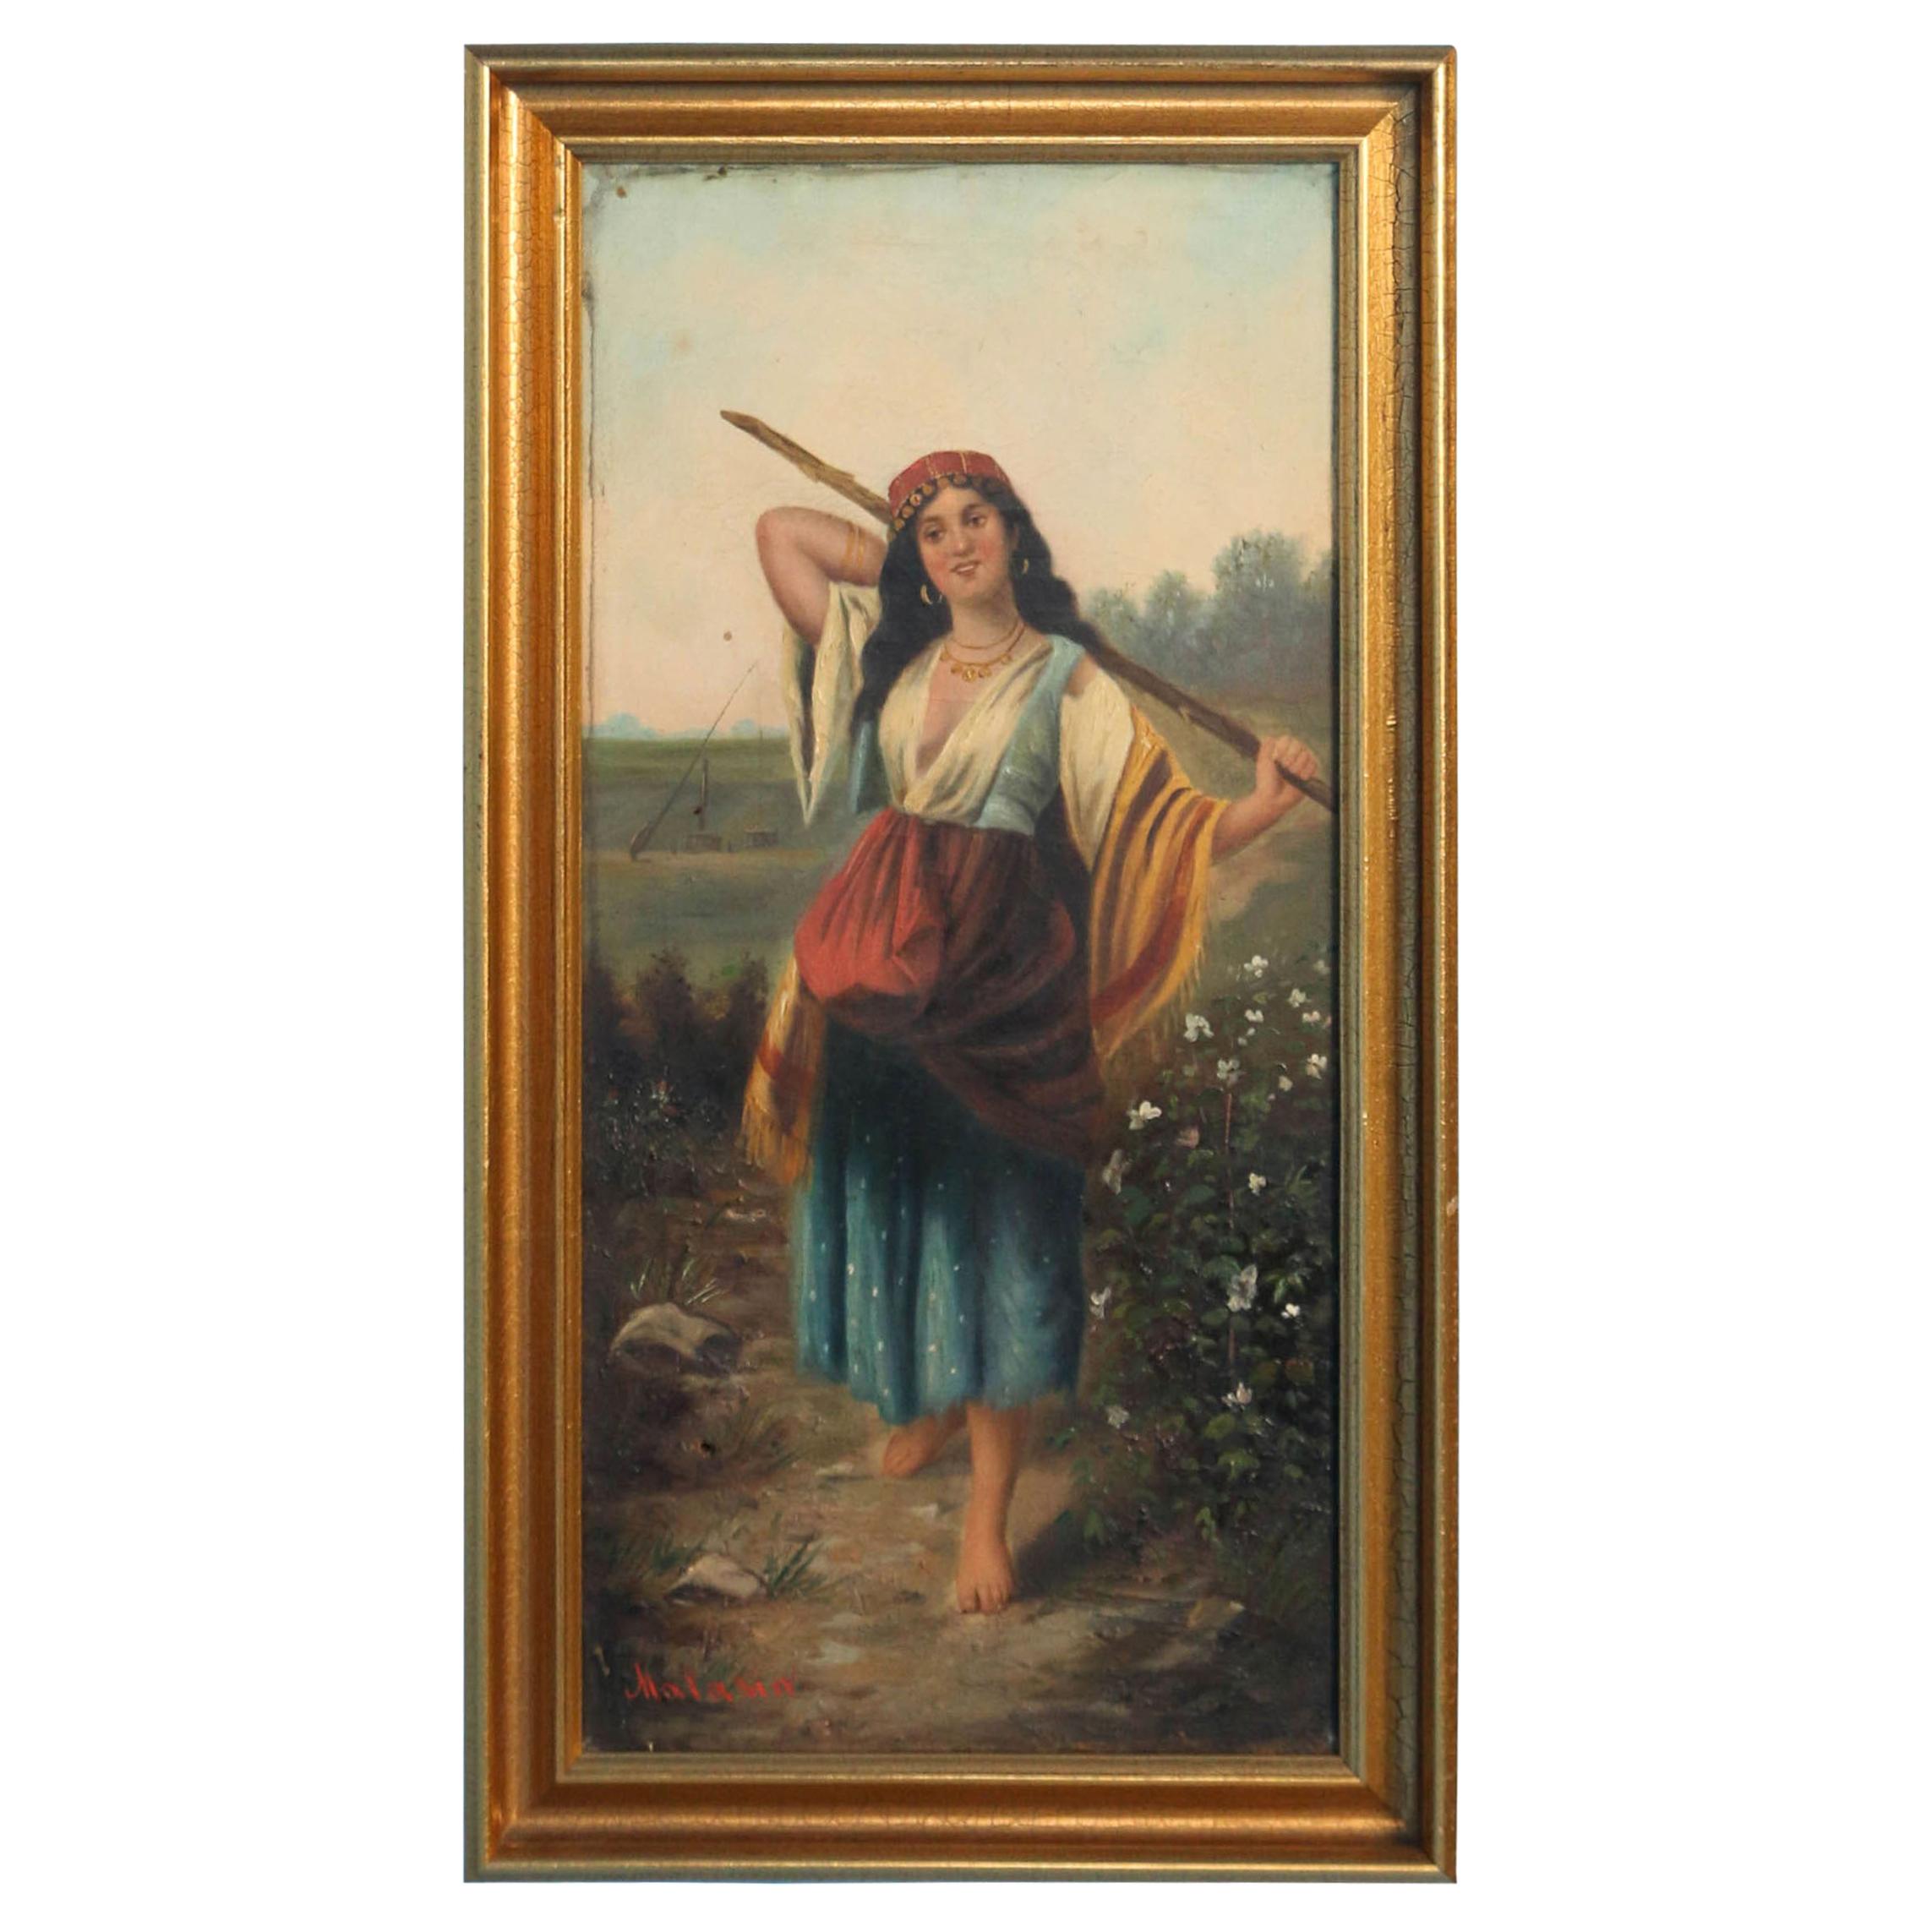 Original Oil on Canvas, Young Gypsy Woman with Stick, Signed "Malasin"